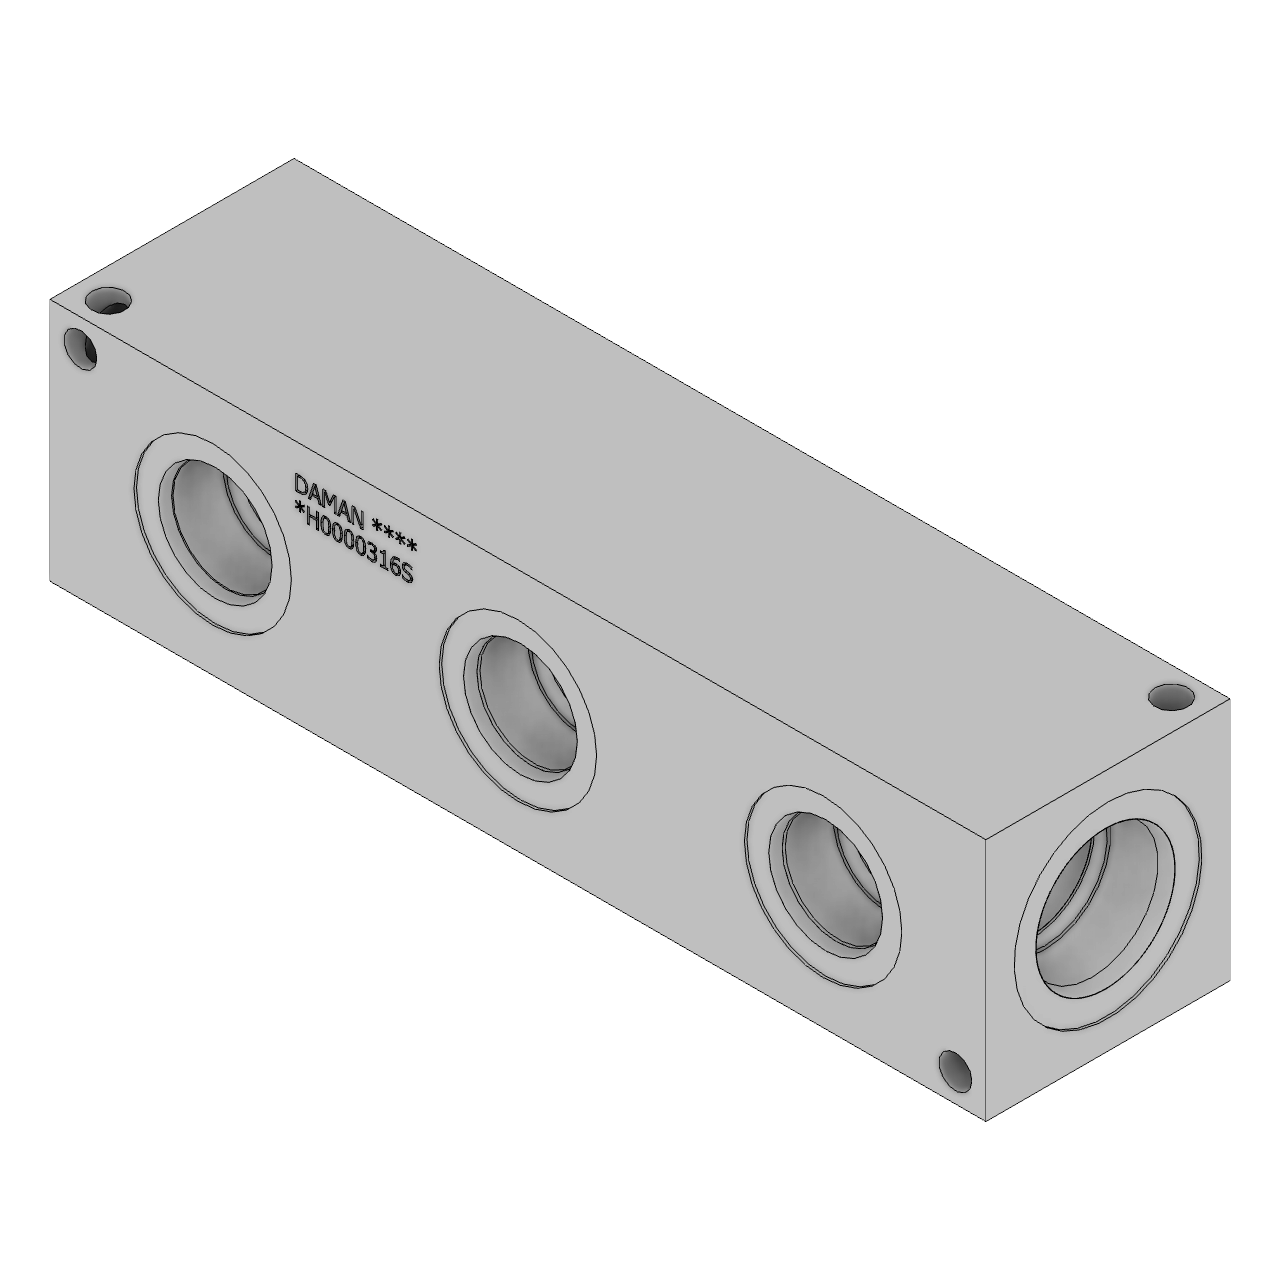 DH0000316S - Header and Junction Blocks